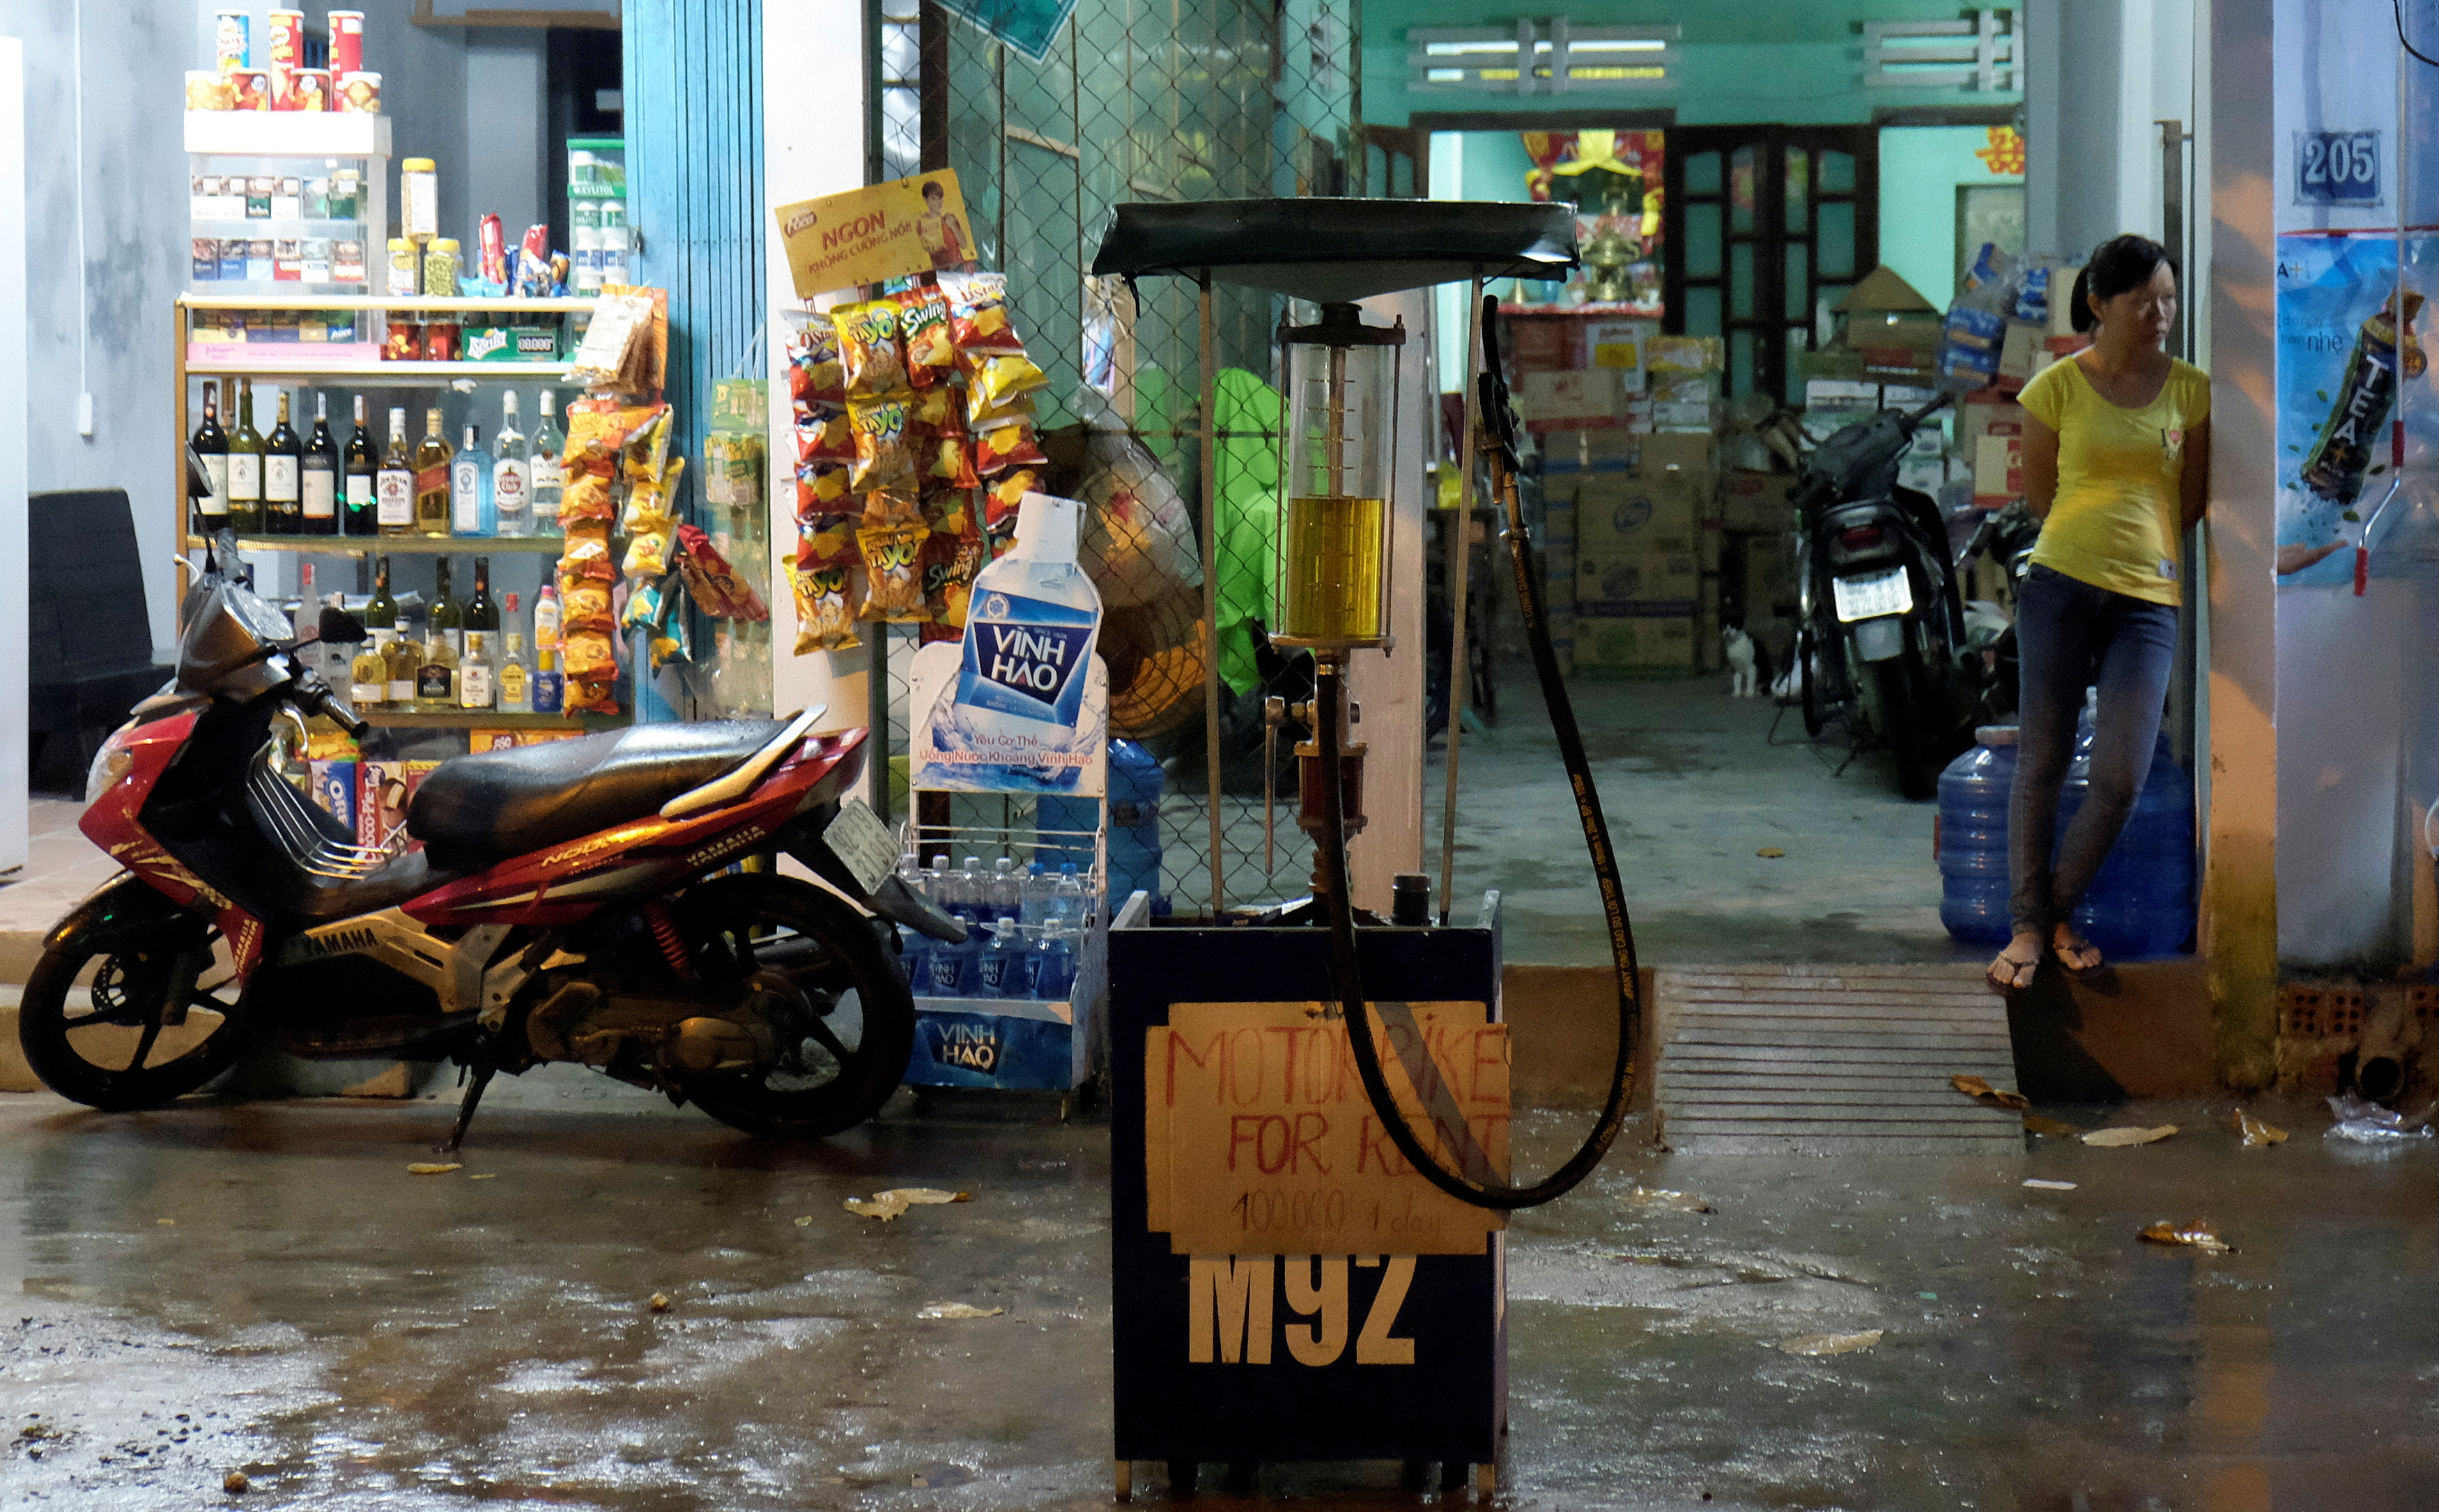 A gasoline station in the ancient city of Hoi An, Quang Nam province